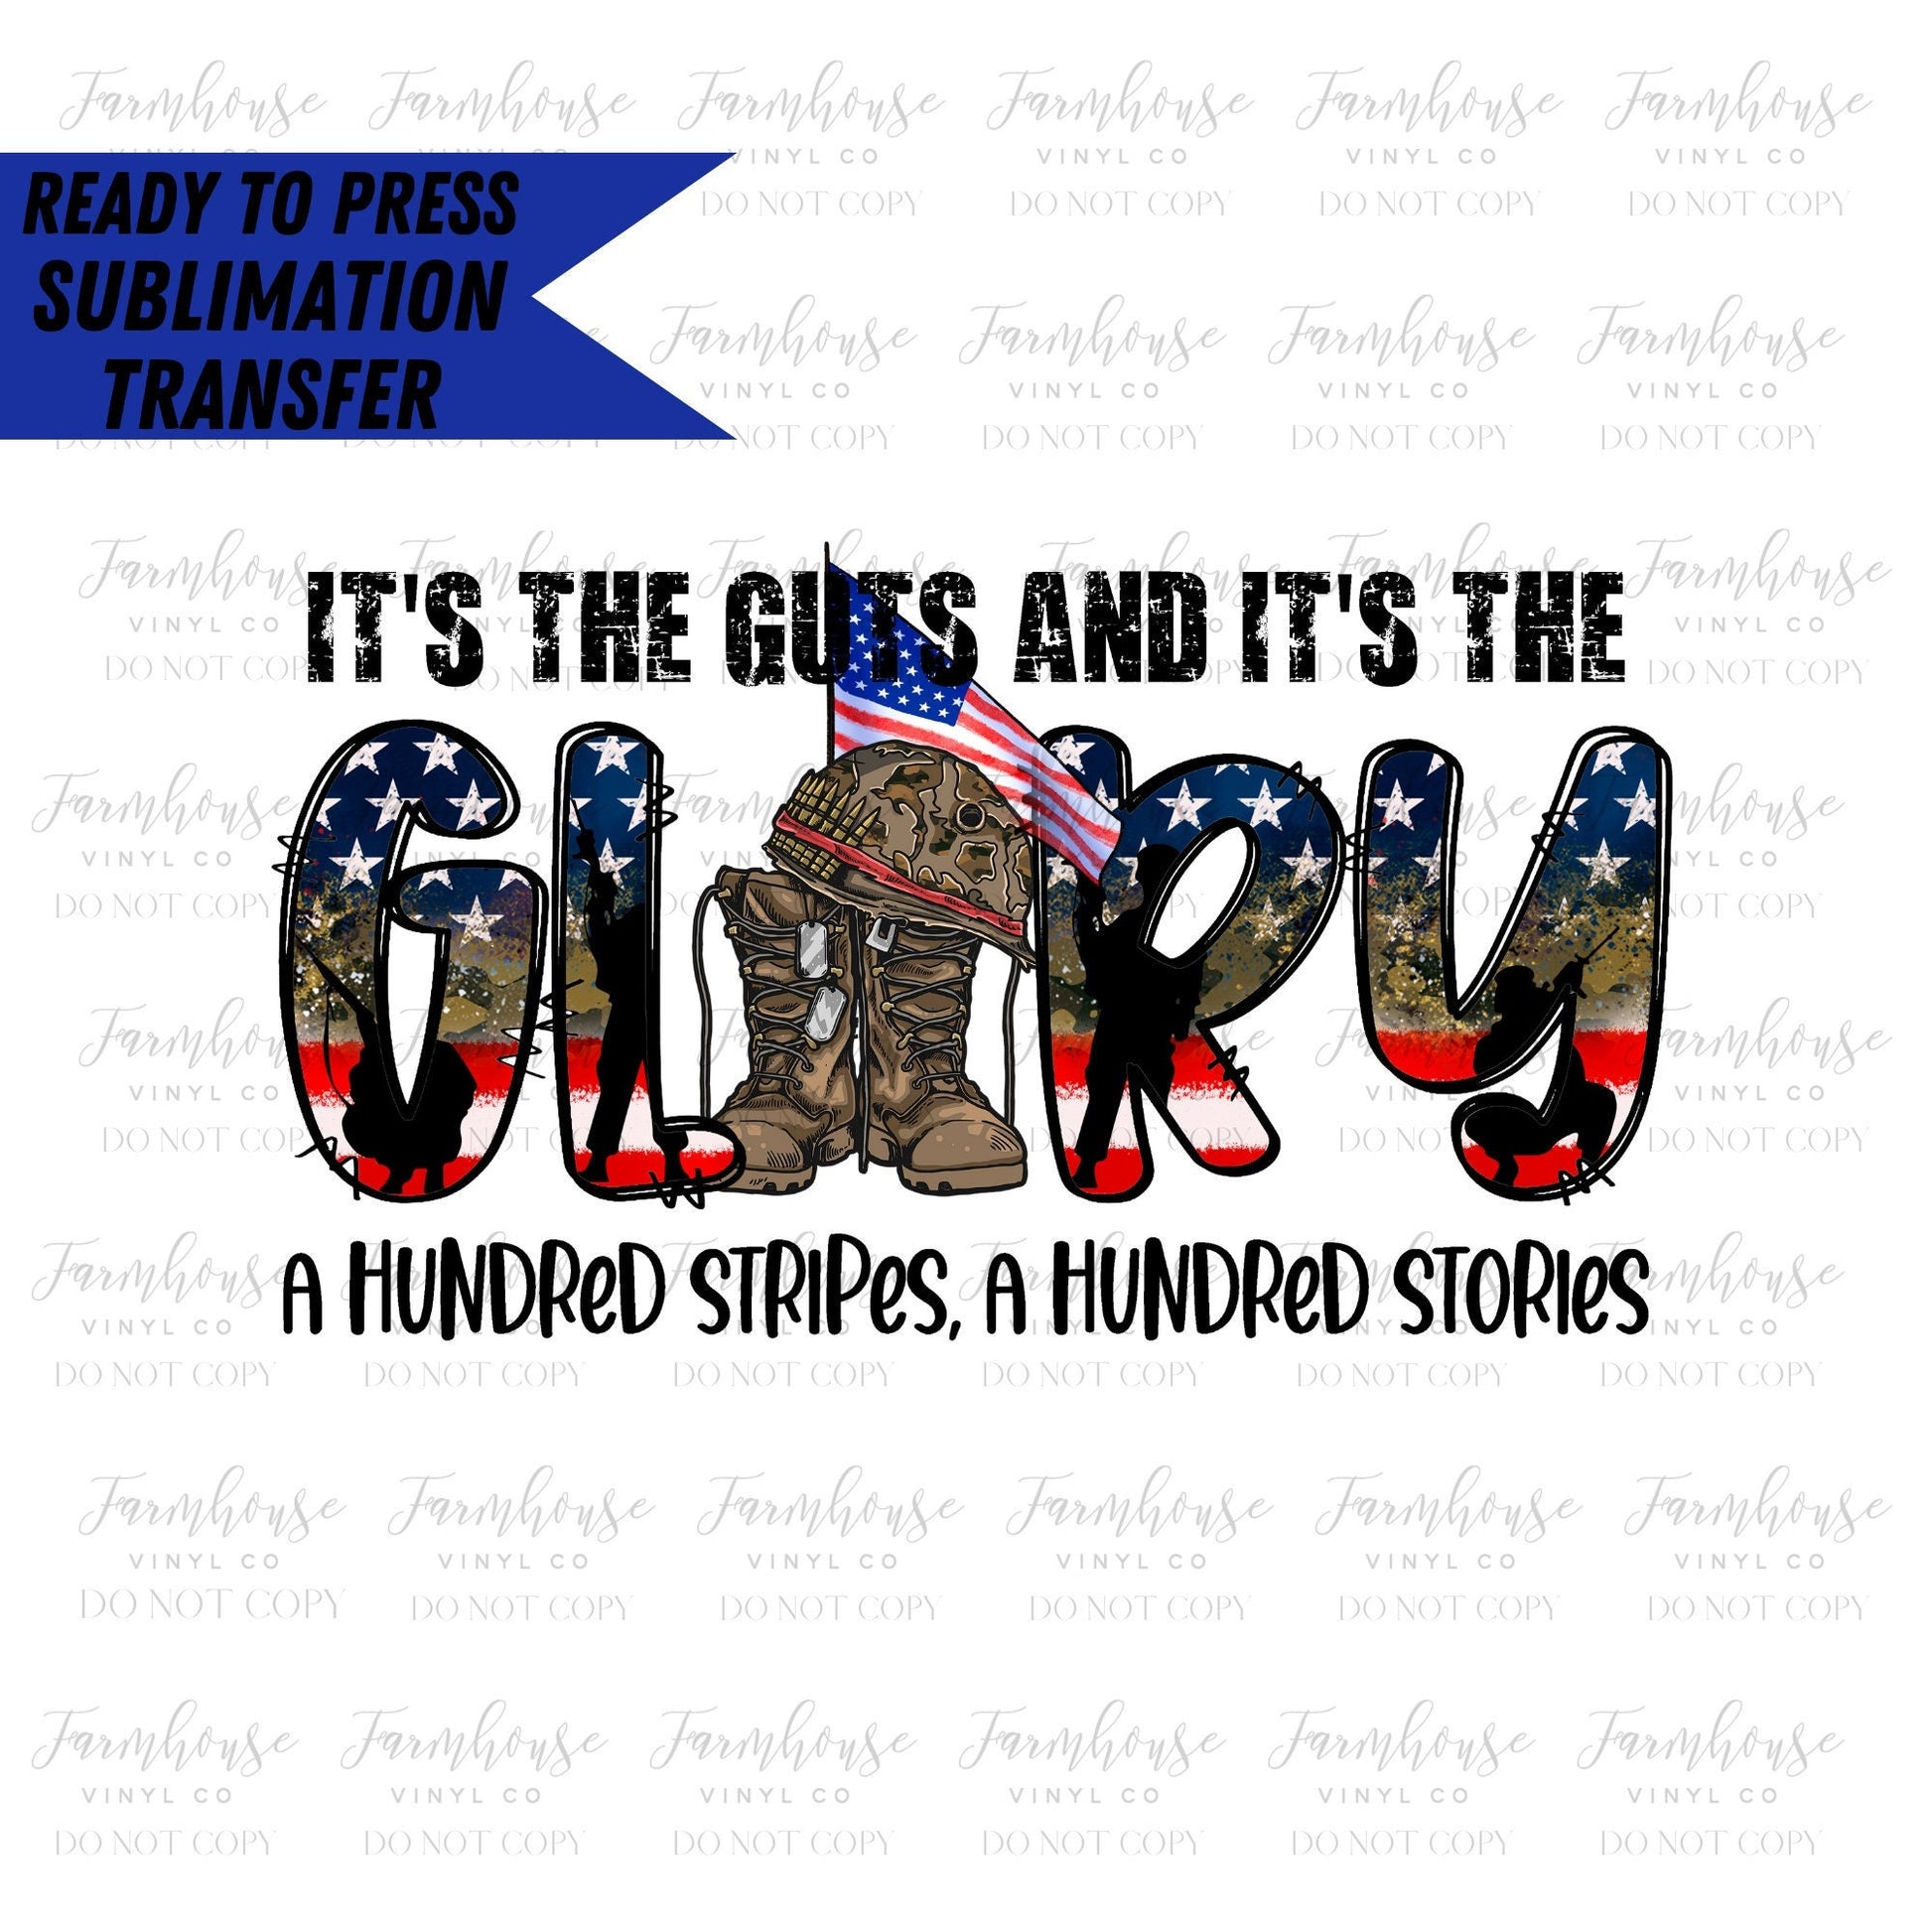 It's the Guts & The Glory 100 Stripes, Ready to Press Sublimation Transfer, Sublimation Transfers, Heat Transfer, Military Boots, 4th July - Farmhouse Vinyl Co